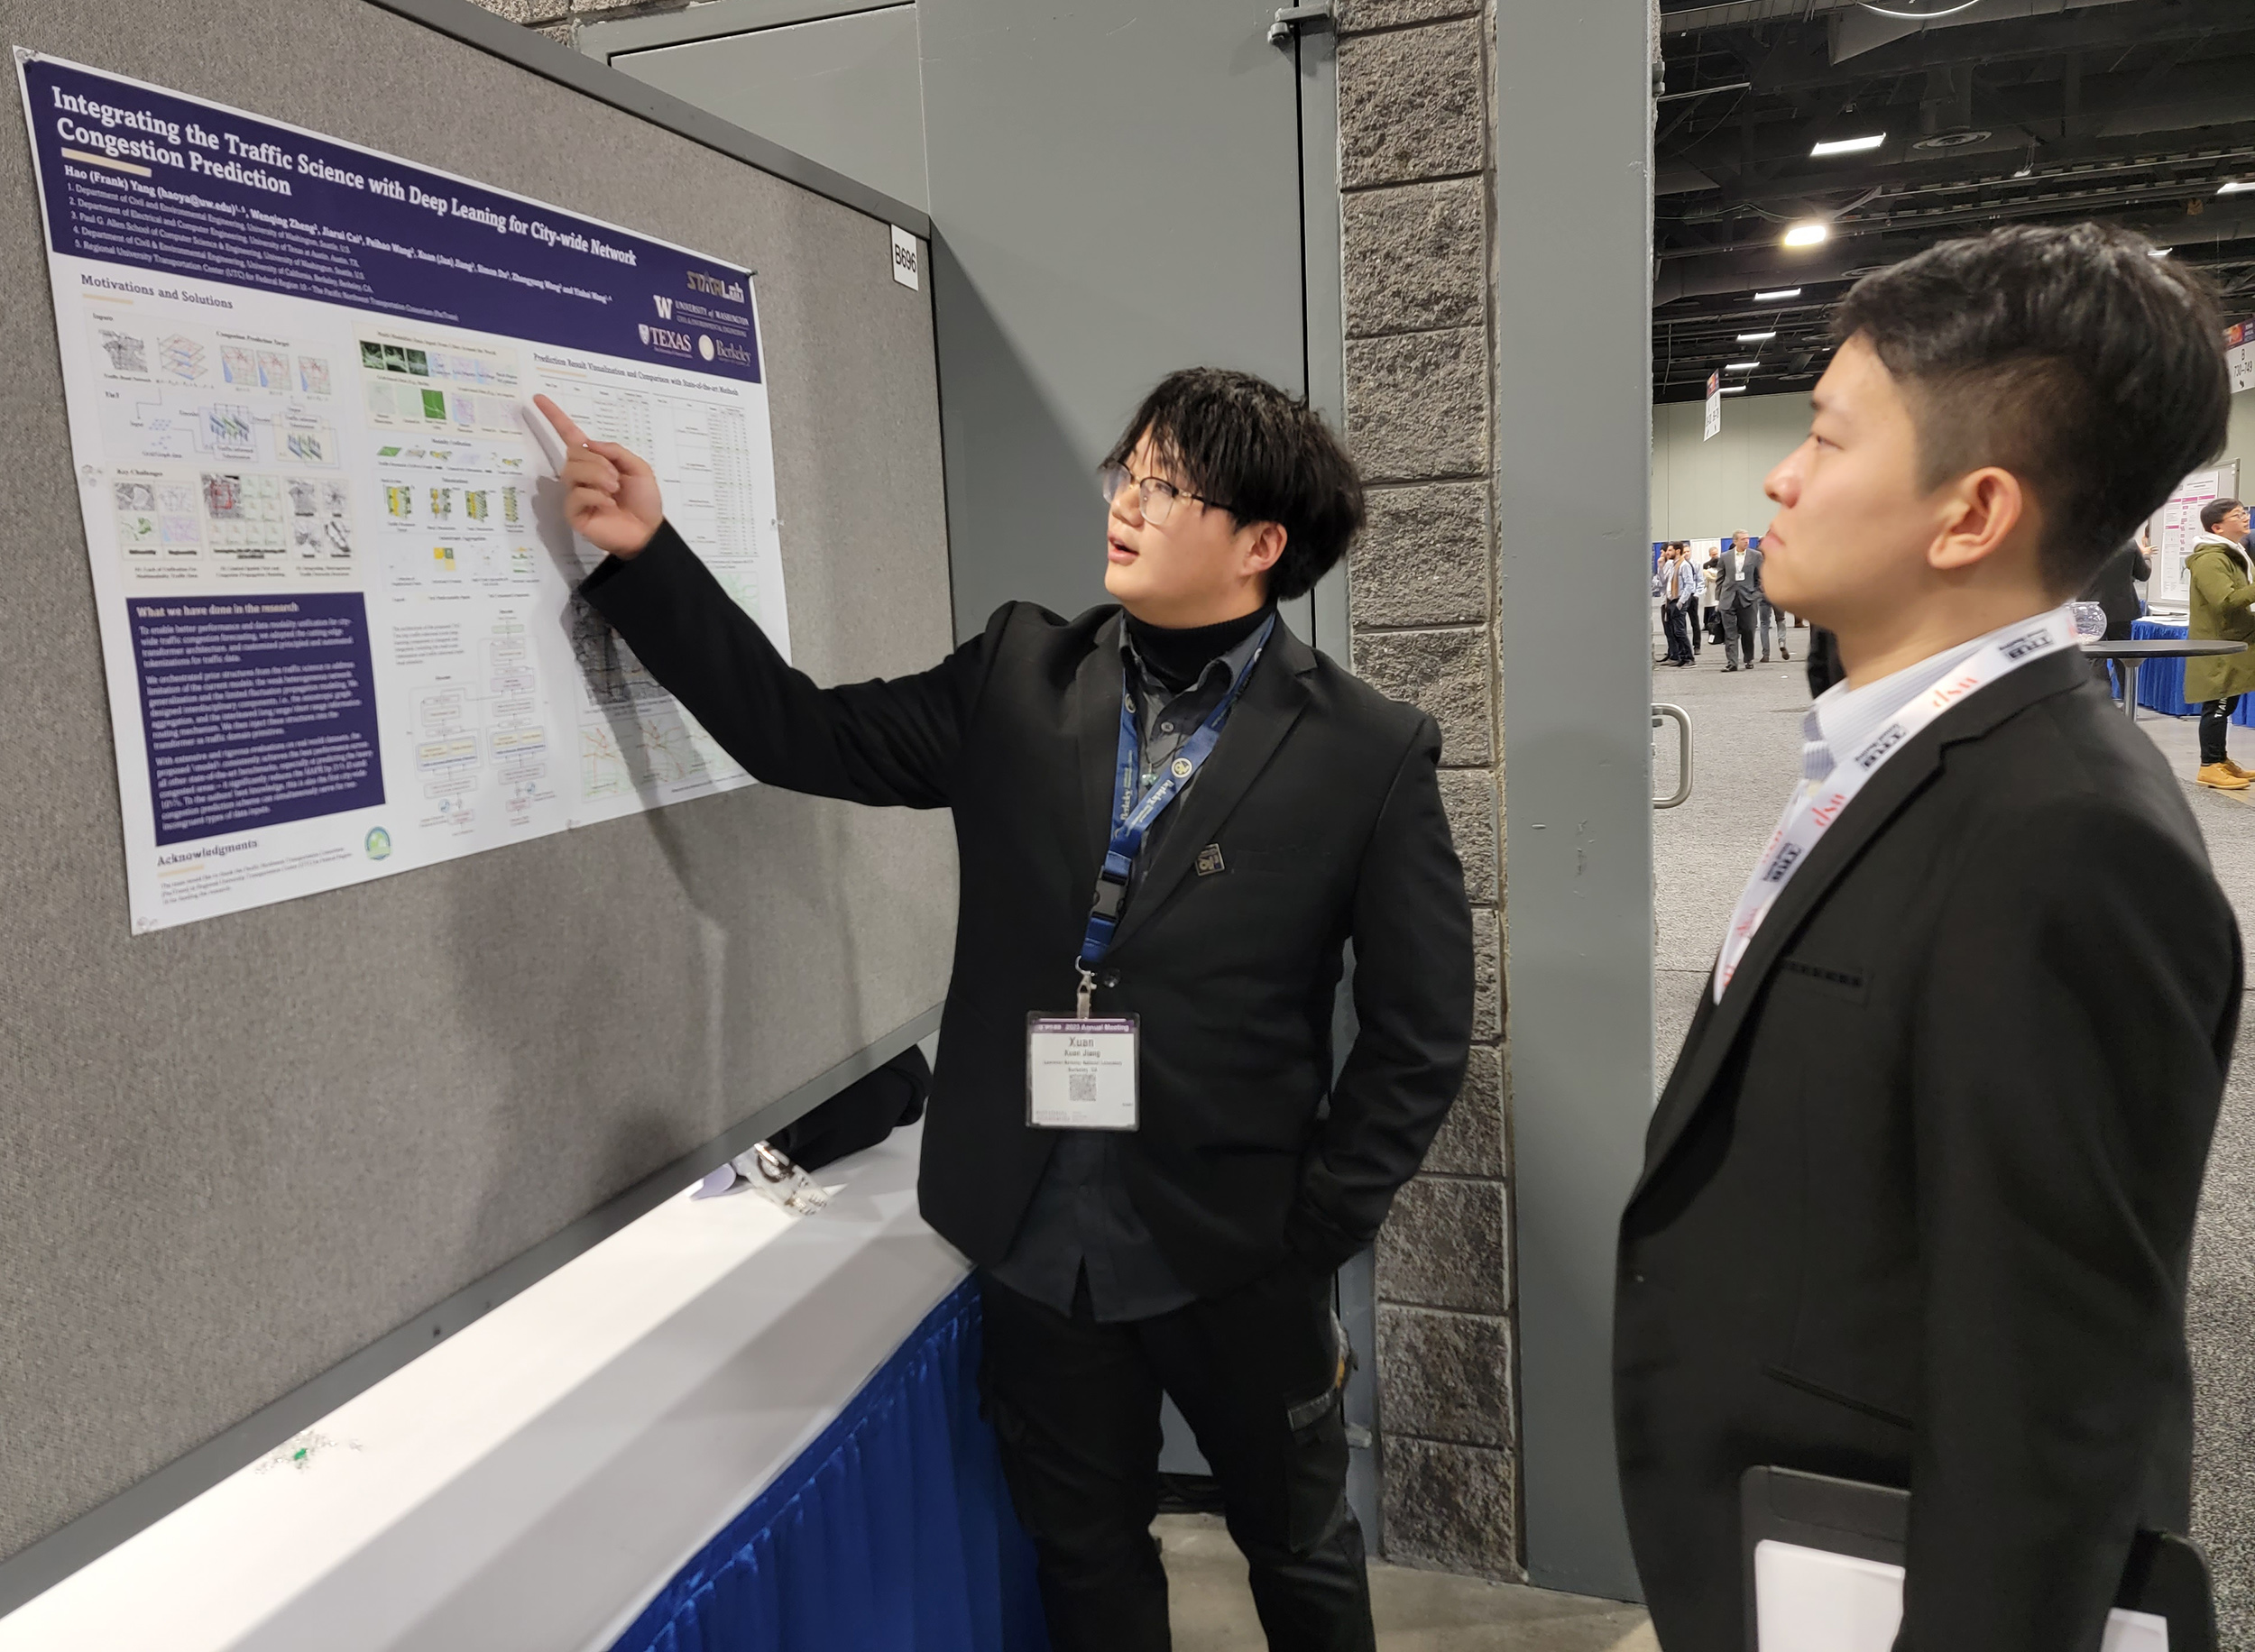 CEE doctoral student Xuan Jiang talks about his research on Integrating the Traffic Science with Deep Learning for City-wide Network Congestion Prediction